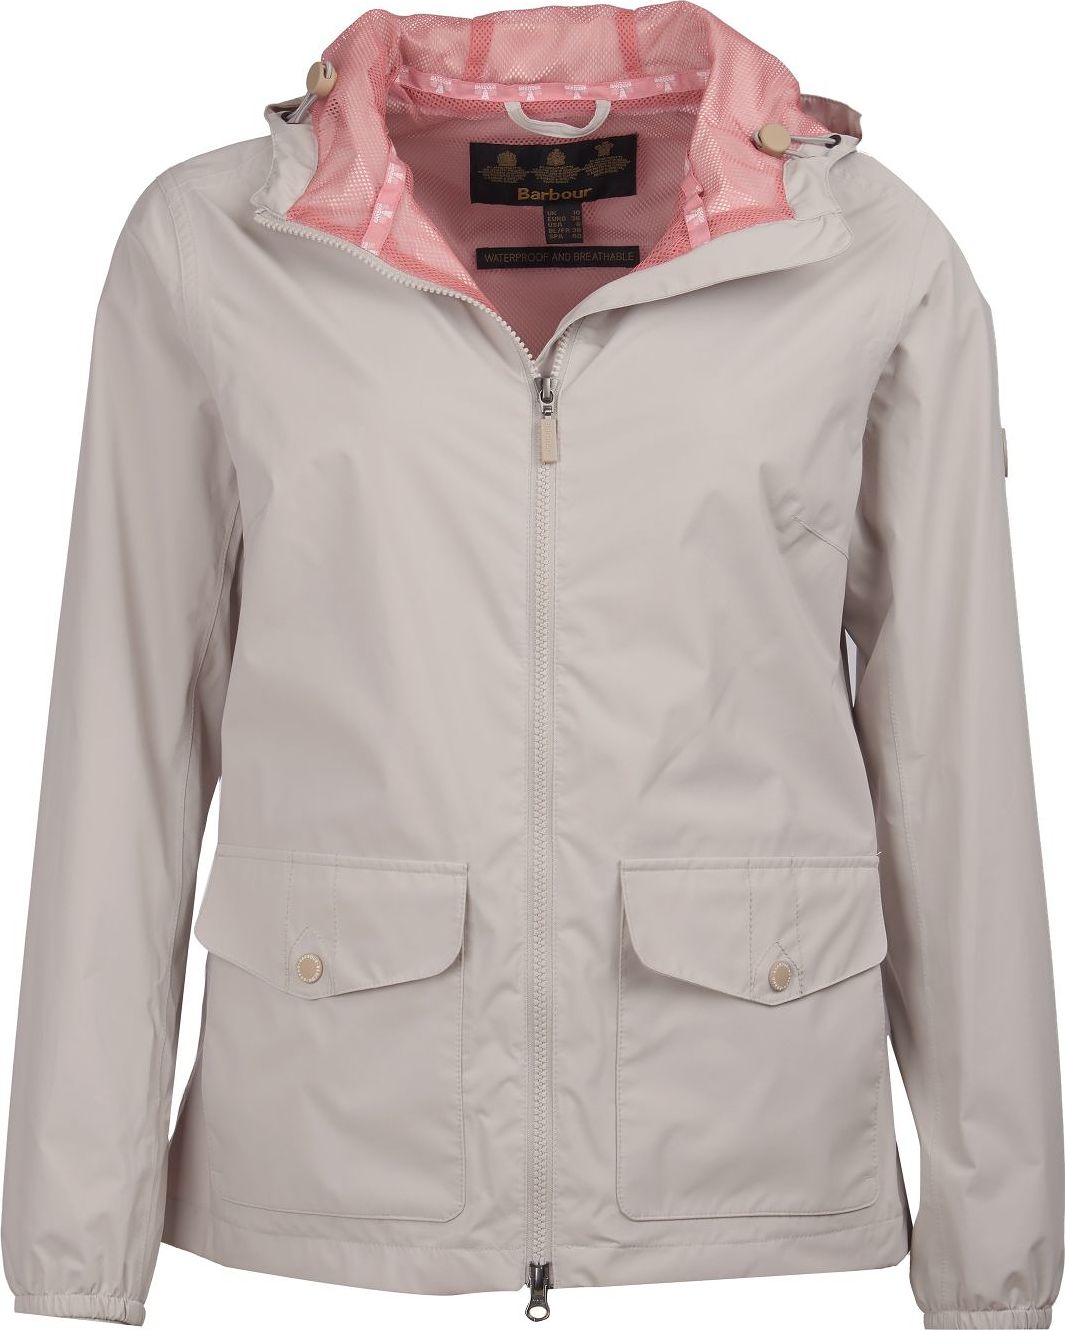 Barbour Abrasion Jacket - Women's | The 